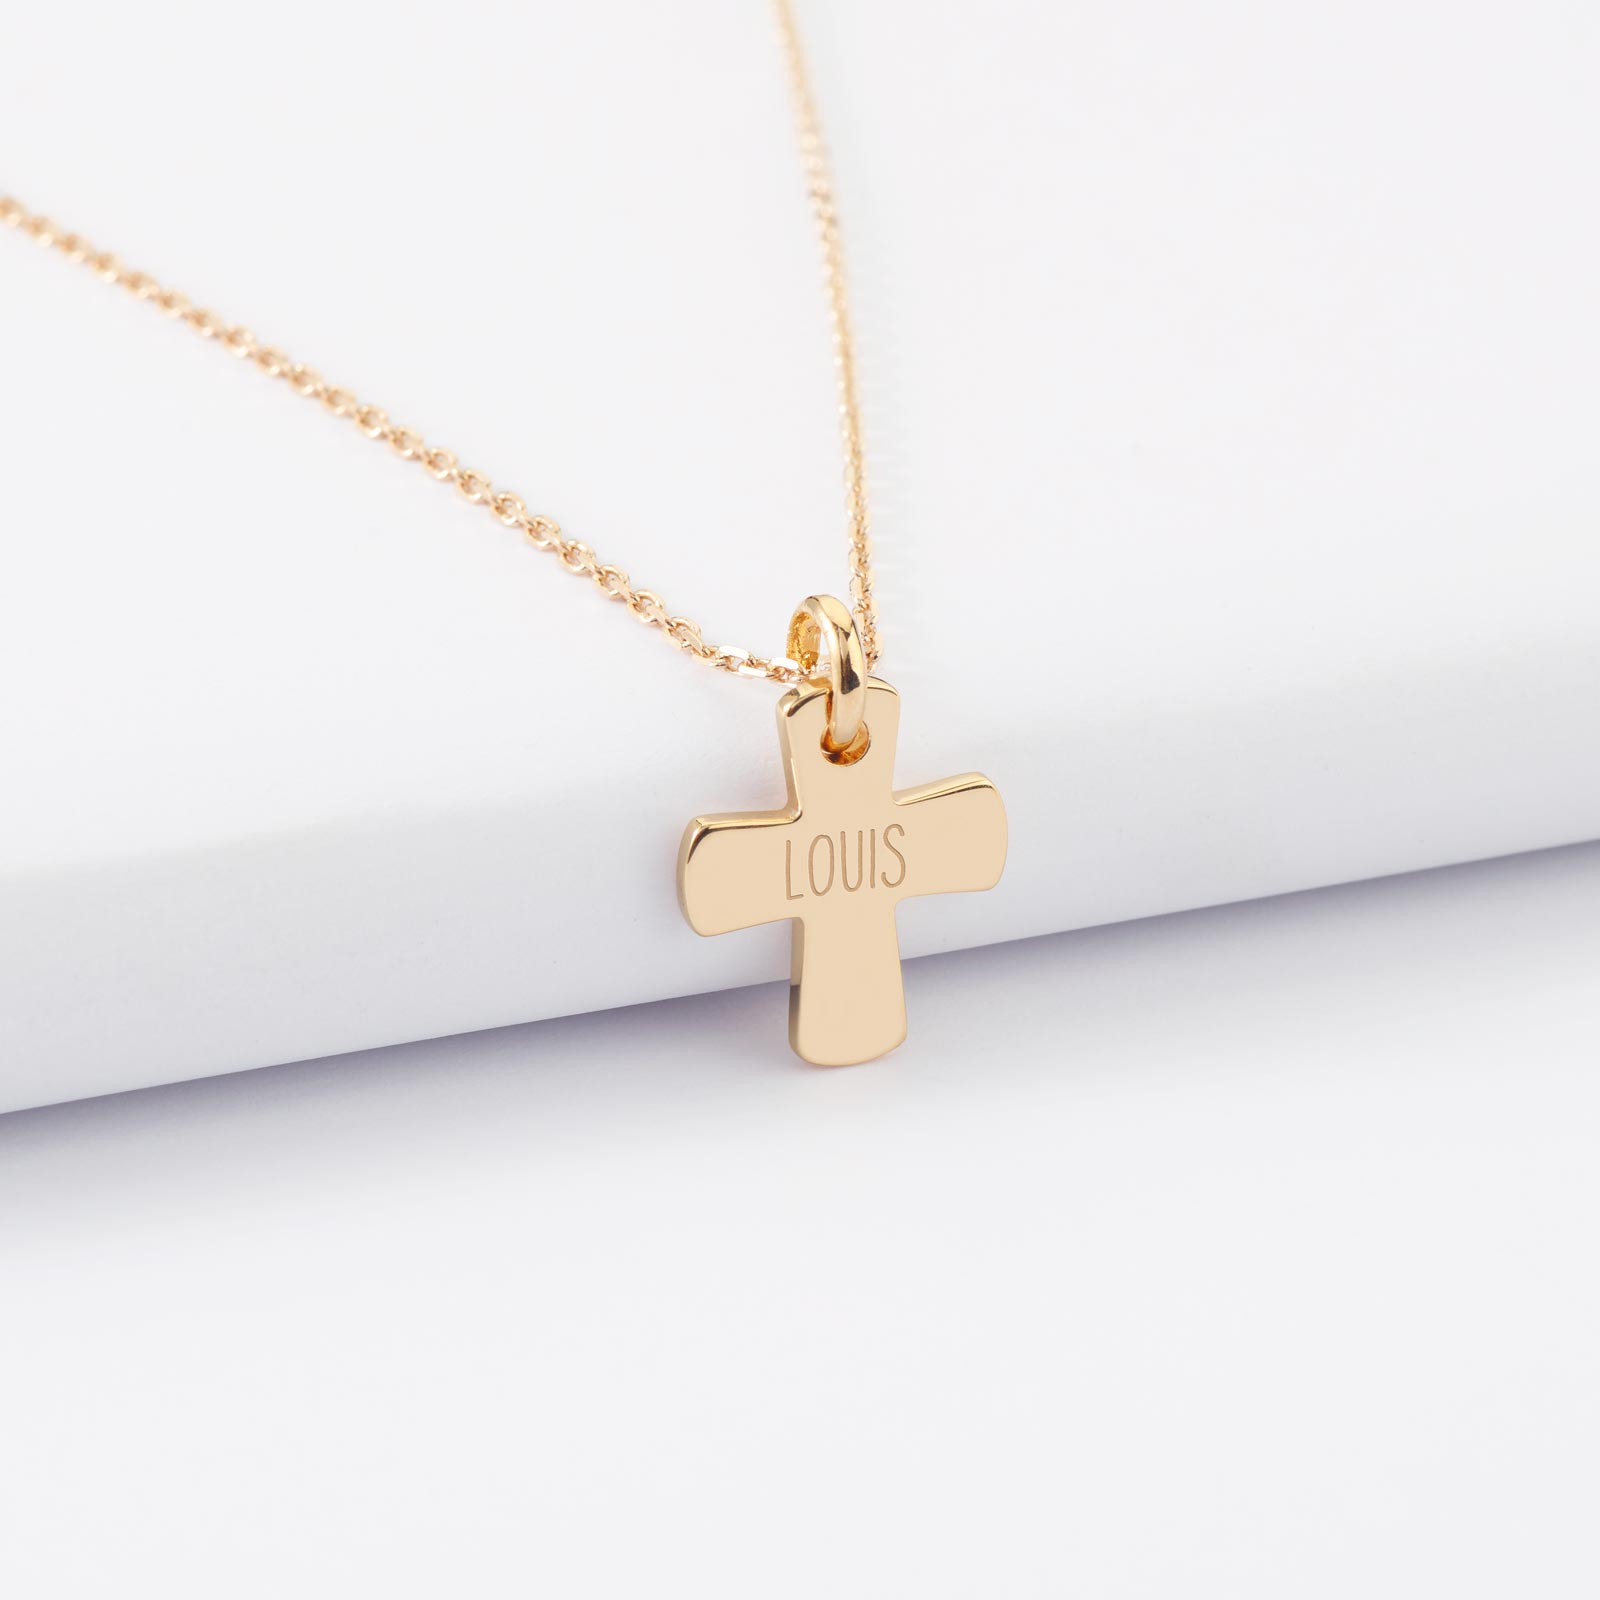 Buy In Season Jewelry Gold Plated Small Jesus Crucifix Cross Pendant  Catholic Necklace for Children 16